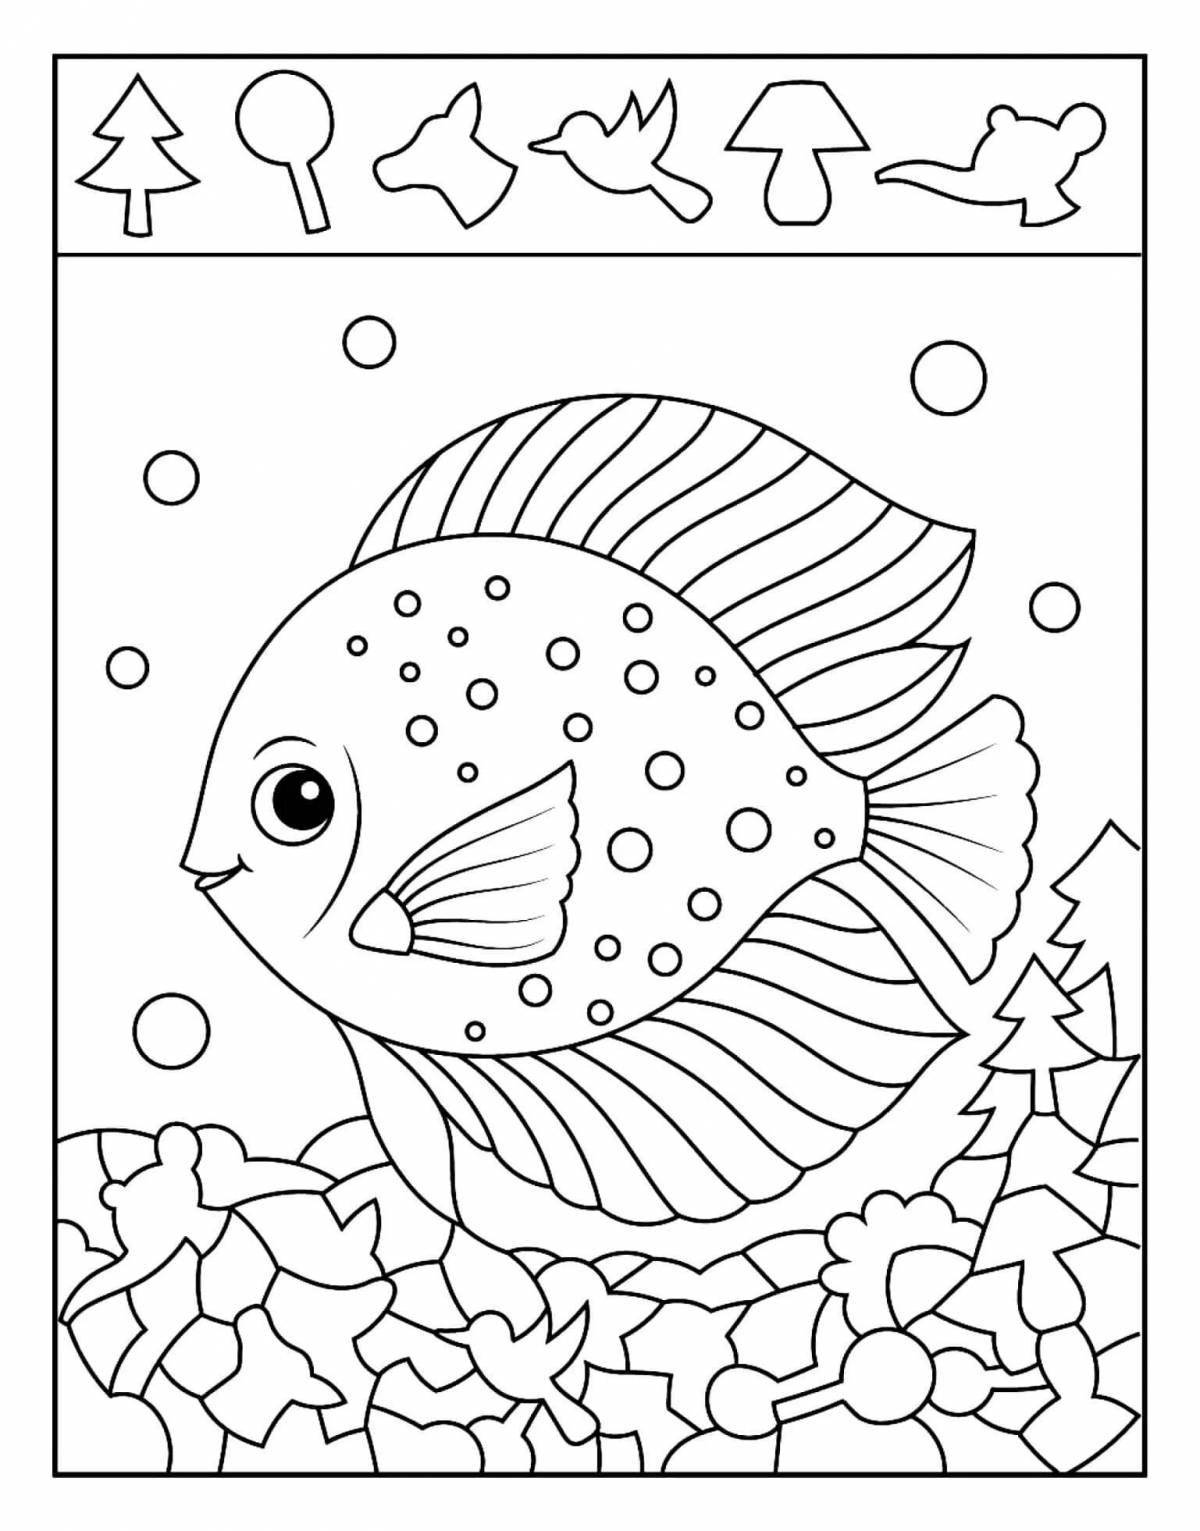 Search coloring pages for 5 year olds